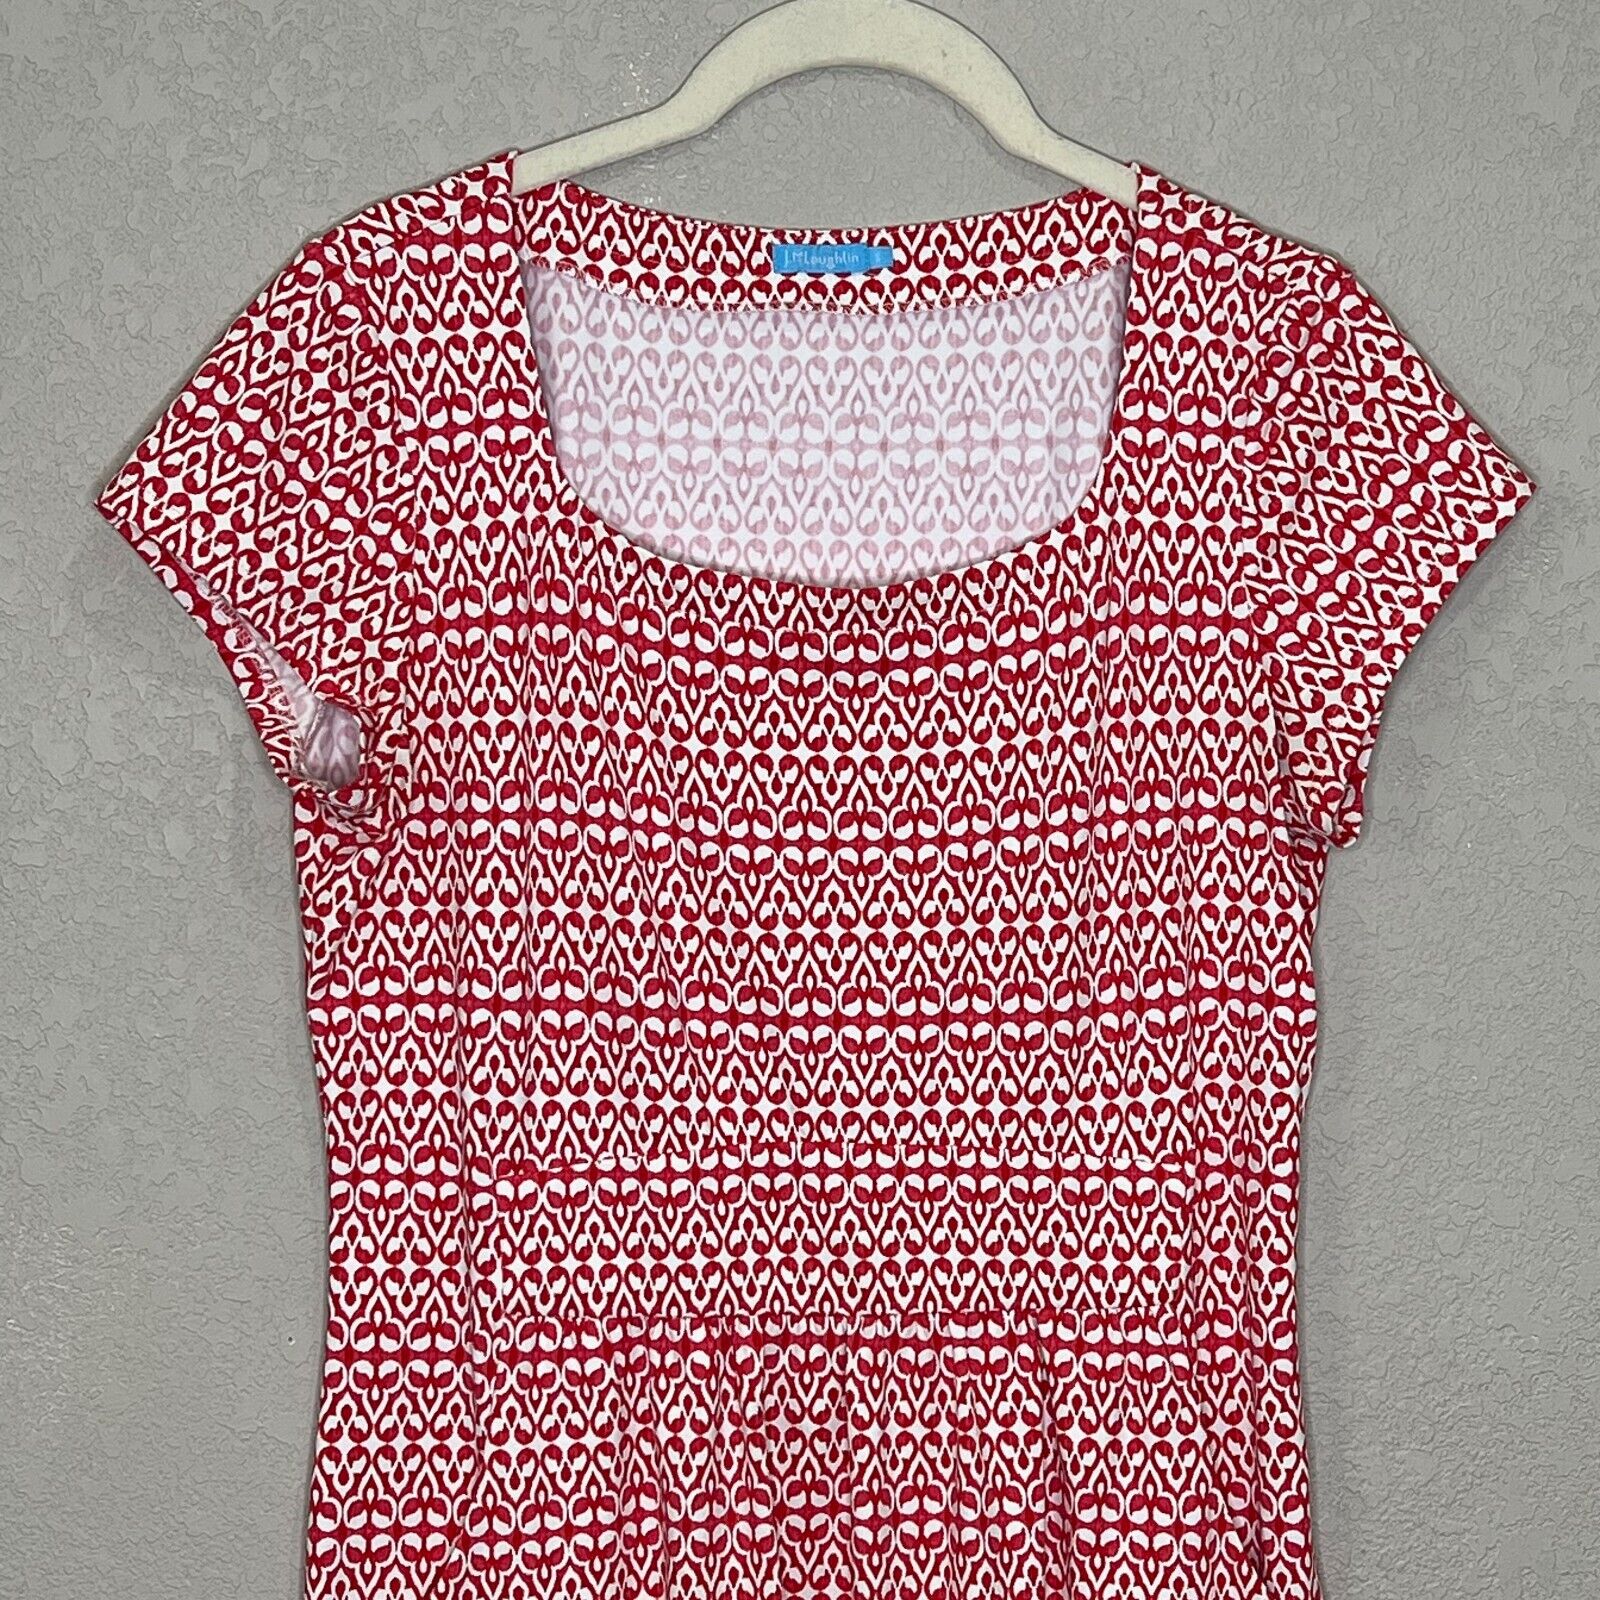 J. Mclaughlin Red White Print Short Sleeve Jersey Dress w Pockets Size Small